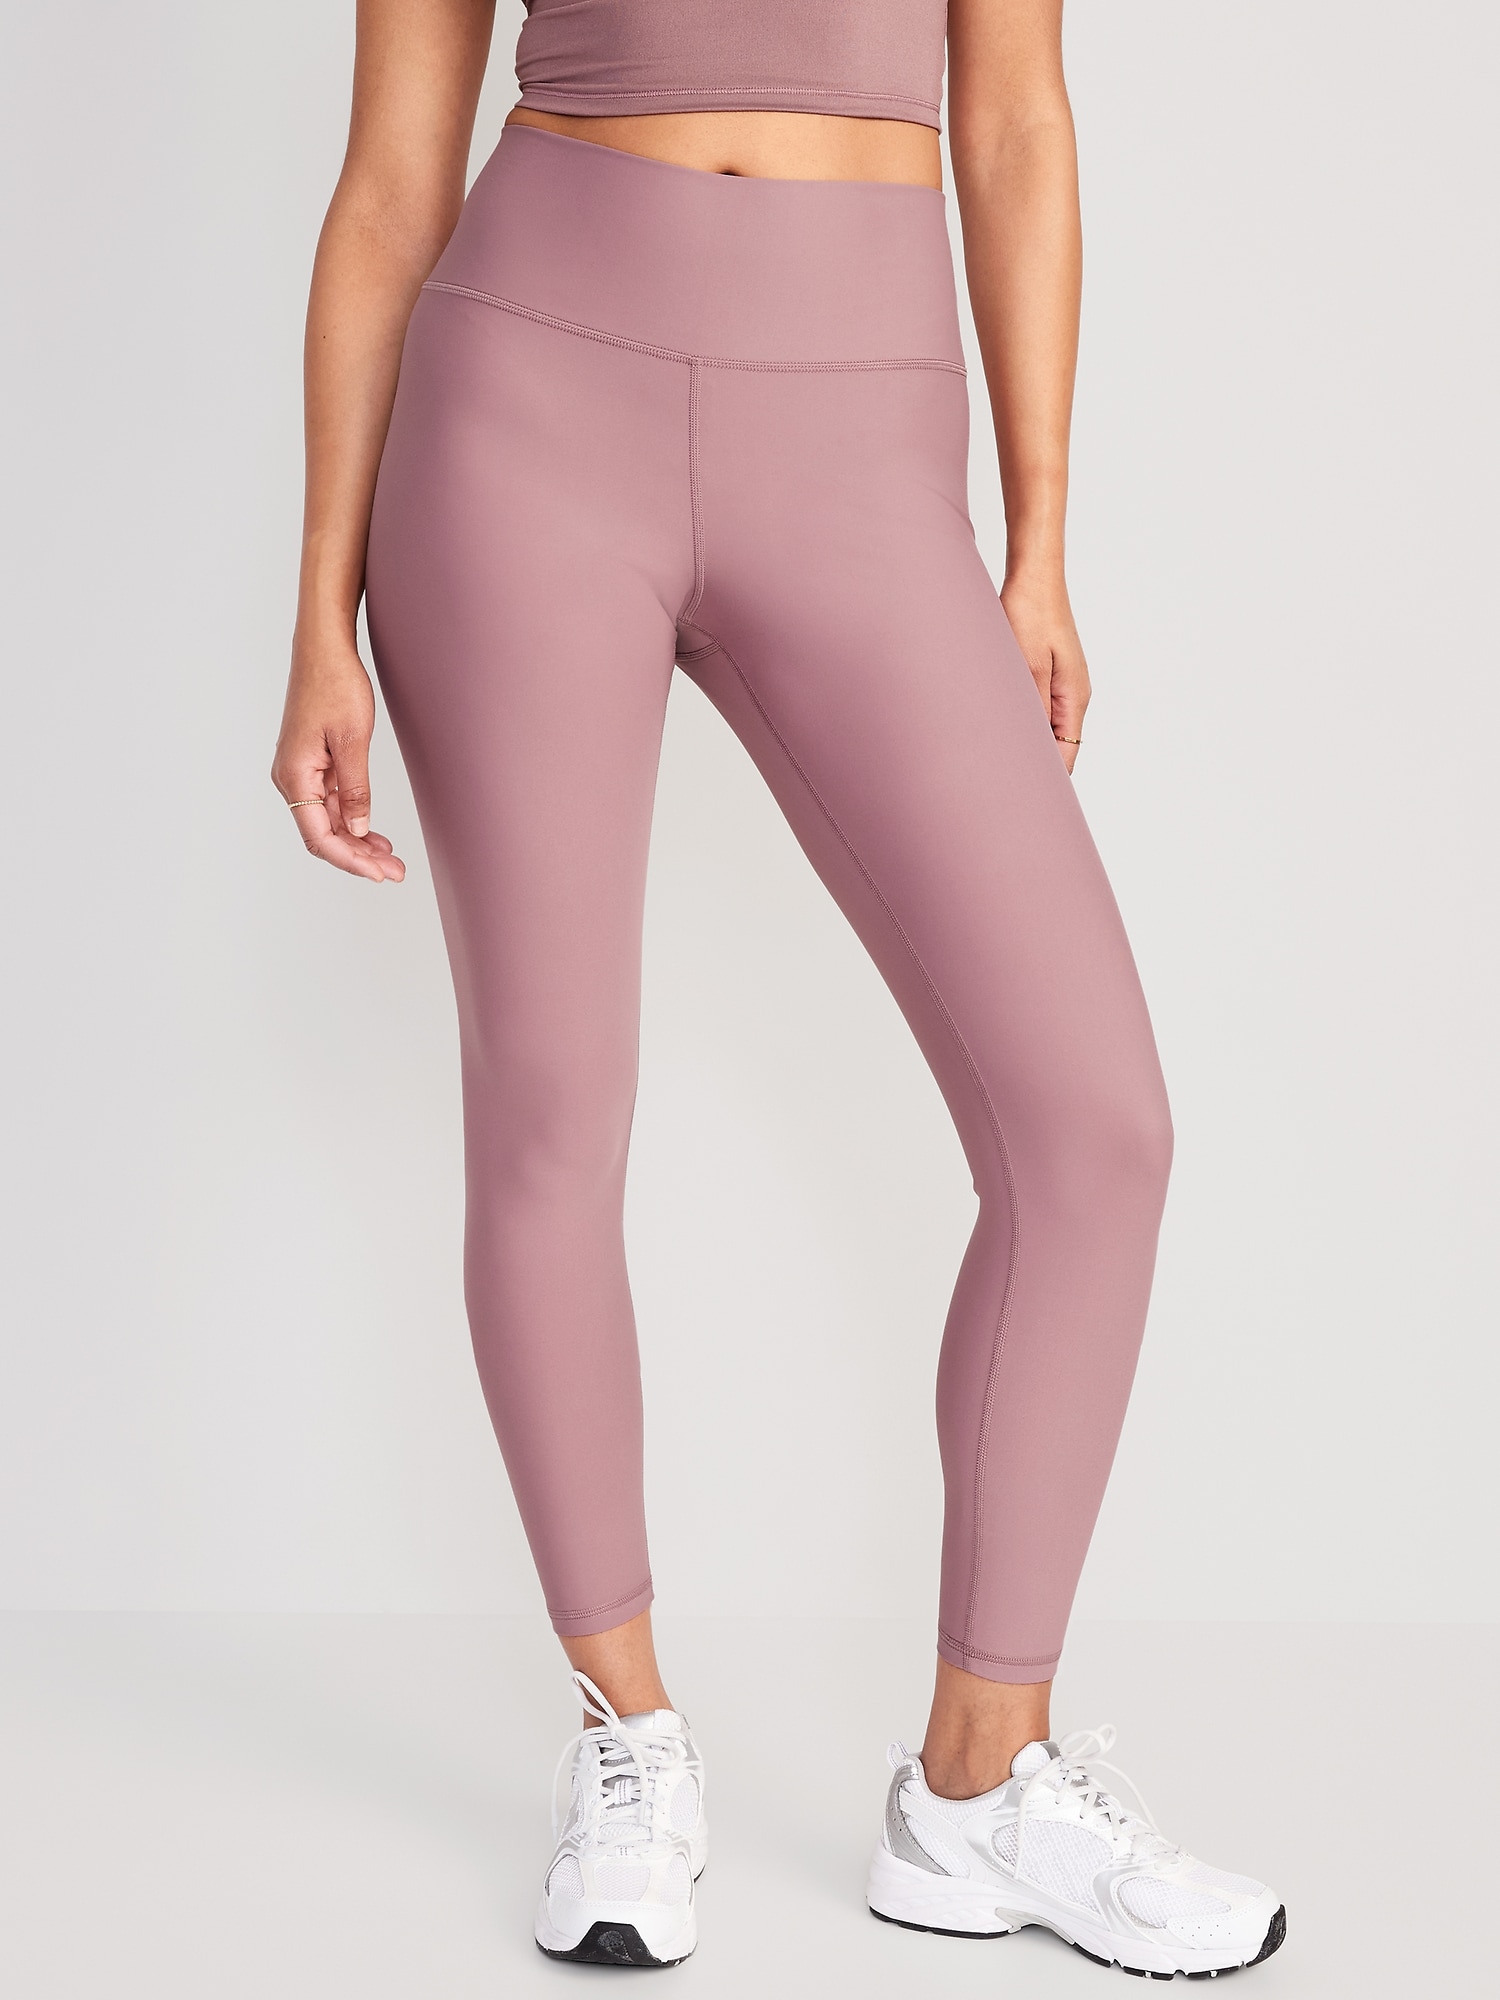 Old Navy High-Waisted PowerSoft 7/8-Length Leggings for Women pink. 1